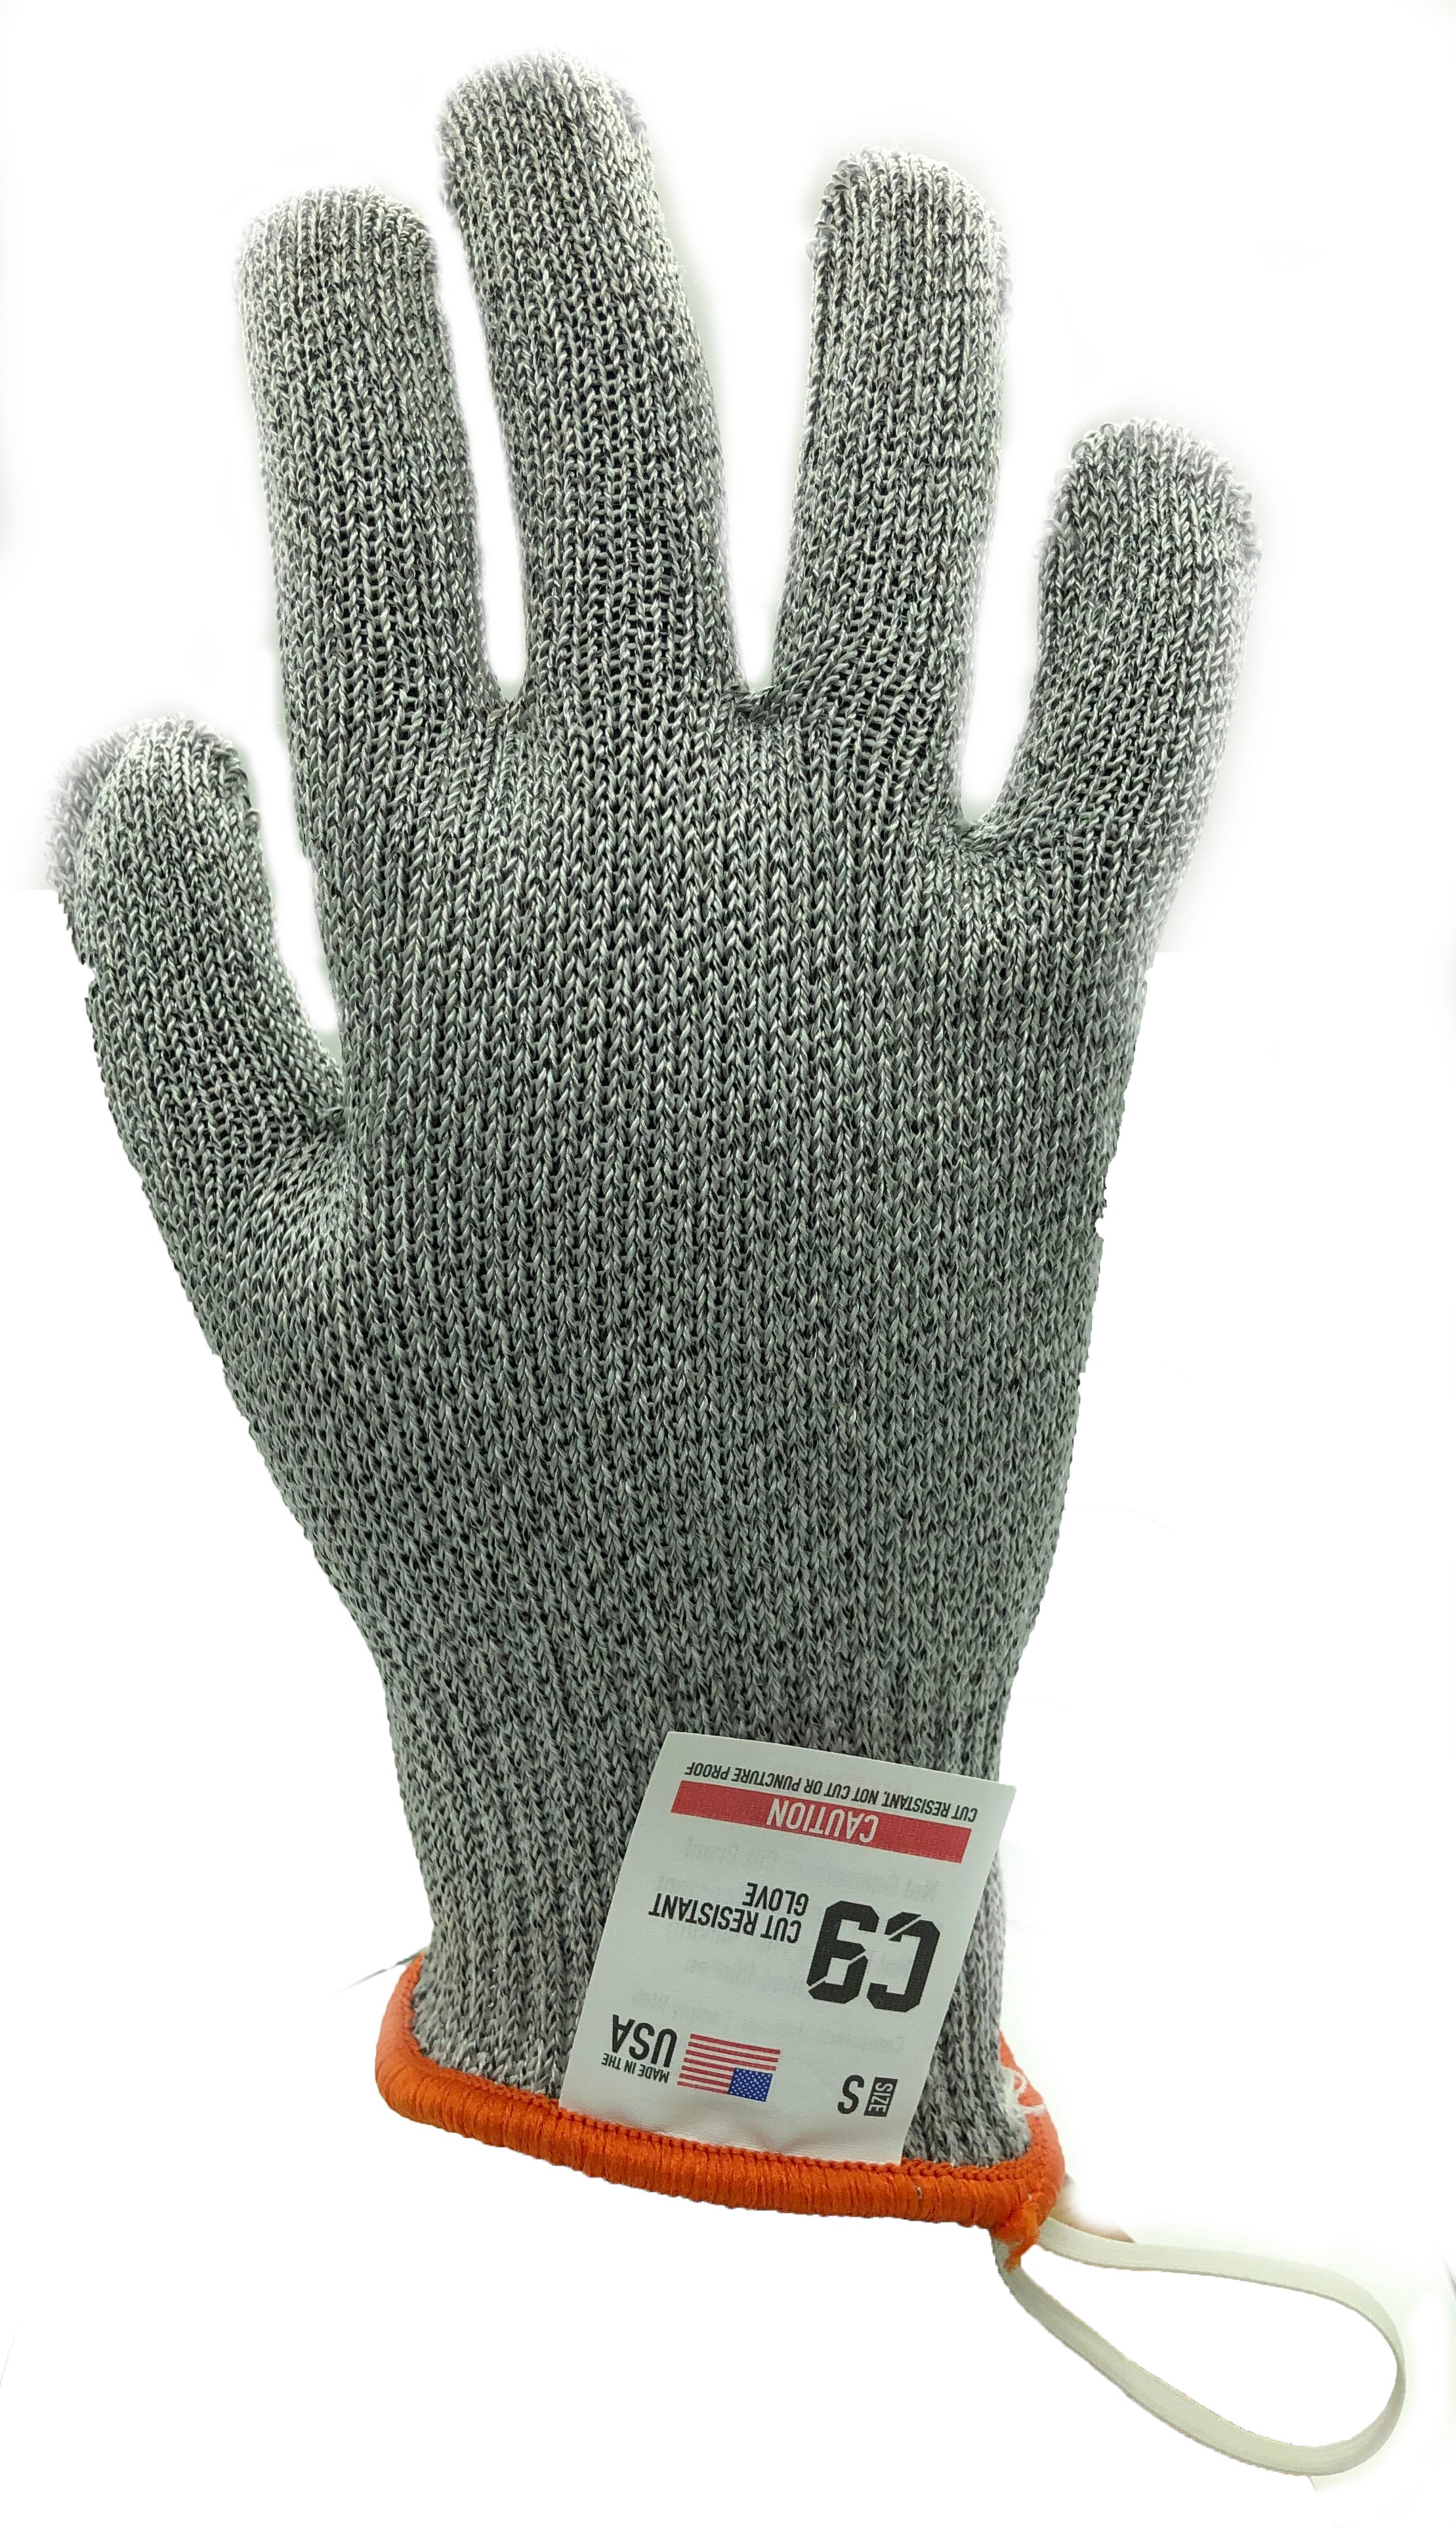 Puncher Proof Gloves